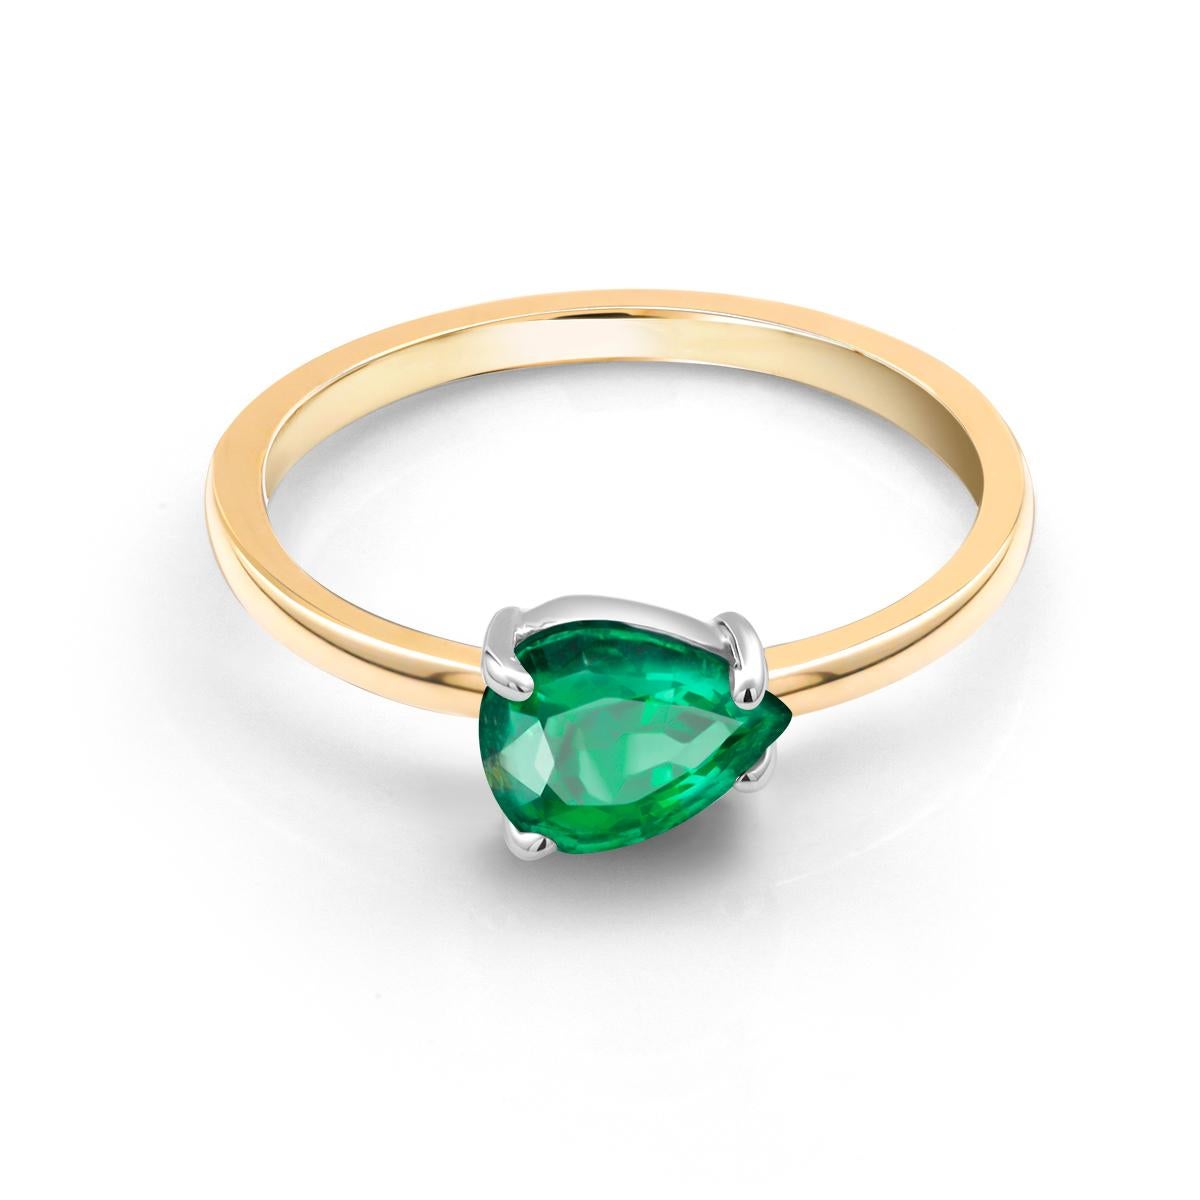 Women's Pear Shaped Emerald Yellow and White Gold Cocktail Ring Weighing 1.20 Carat